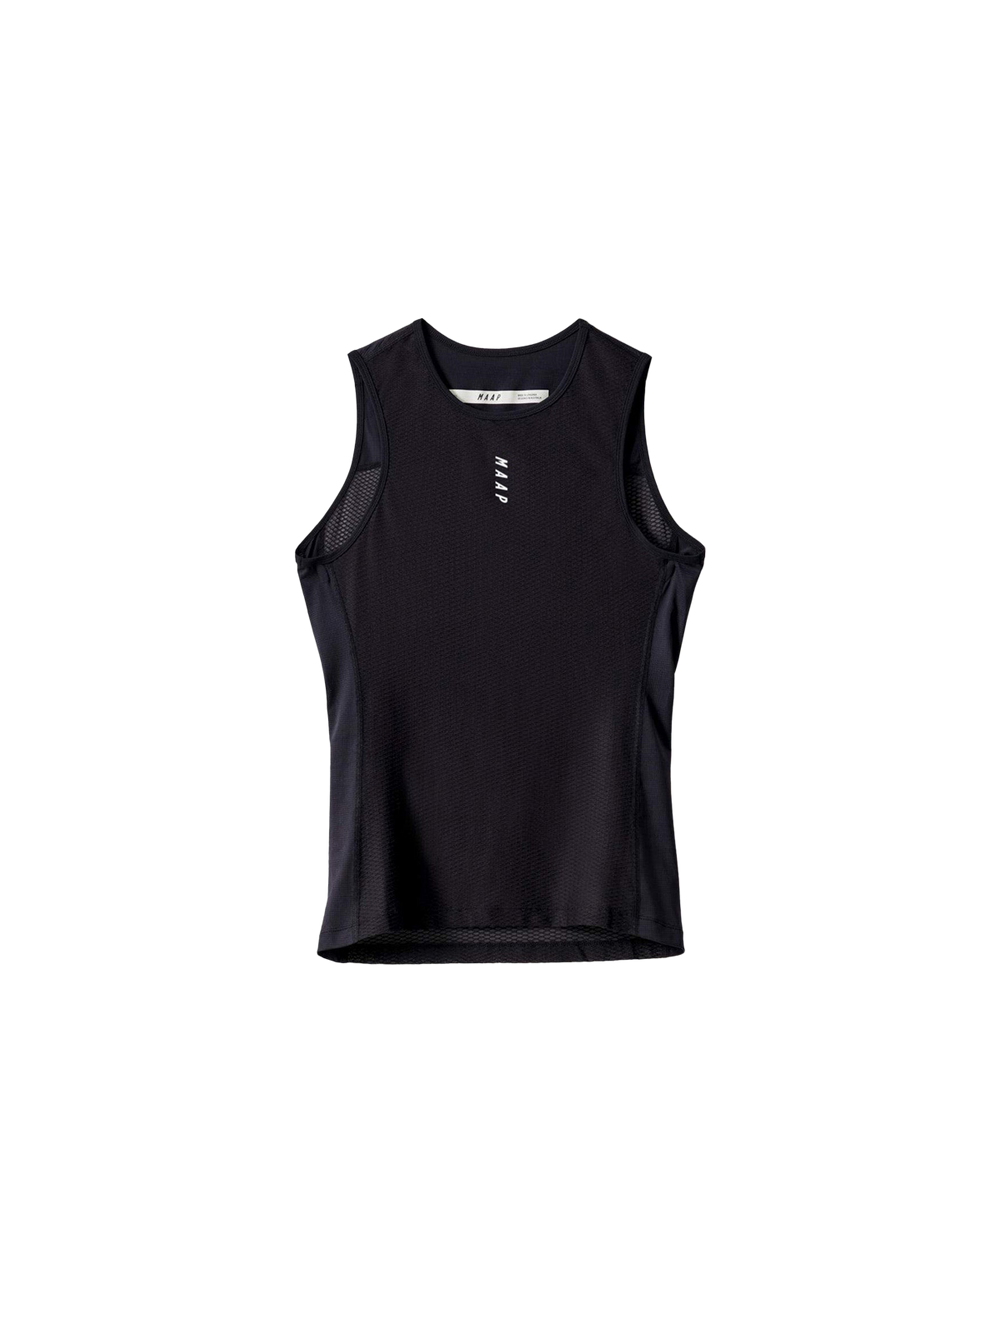 Product Image for Team Base Layer